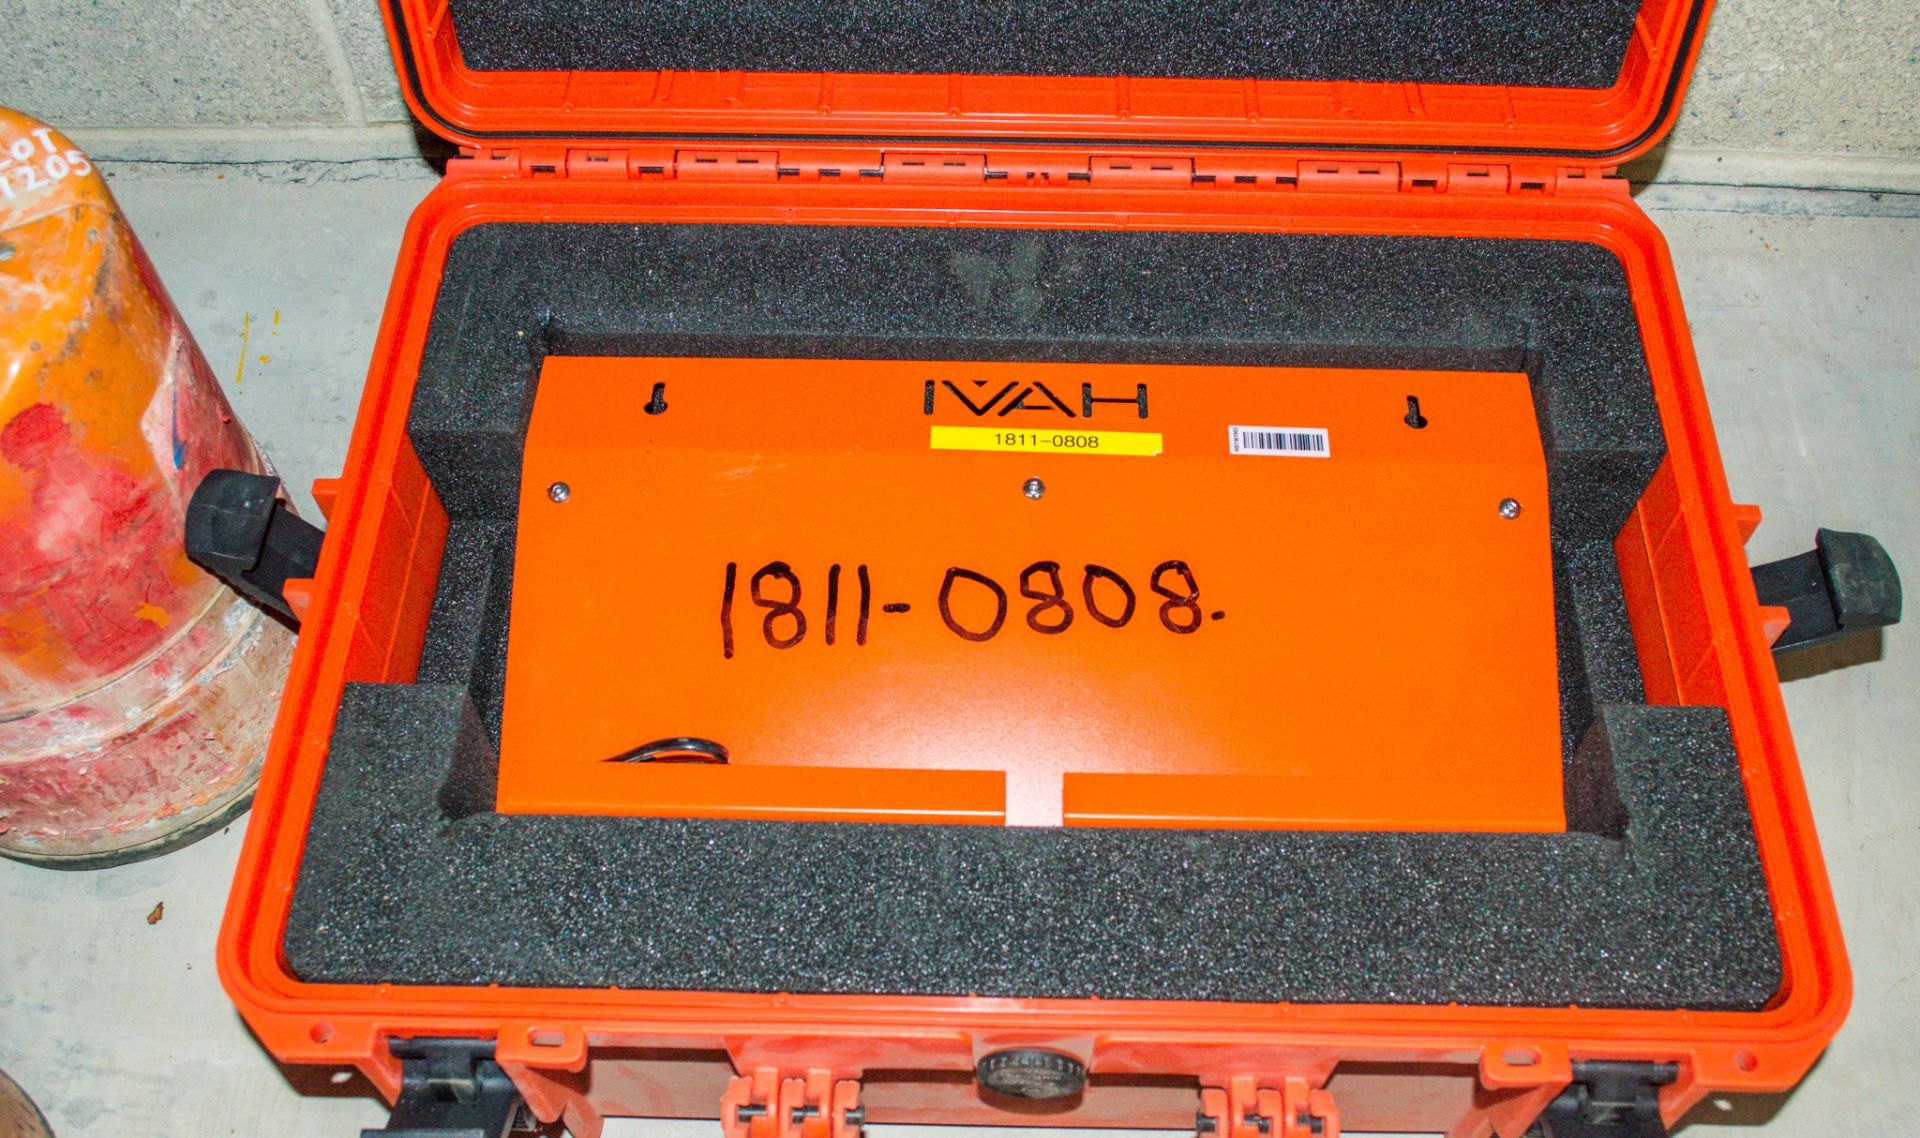 Havi Pack vibration hire kit c/w tool sensors & carry case ** No watches or charger ** - Image 2 of 2